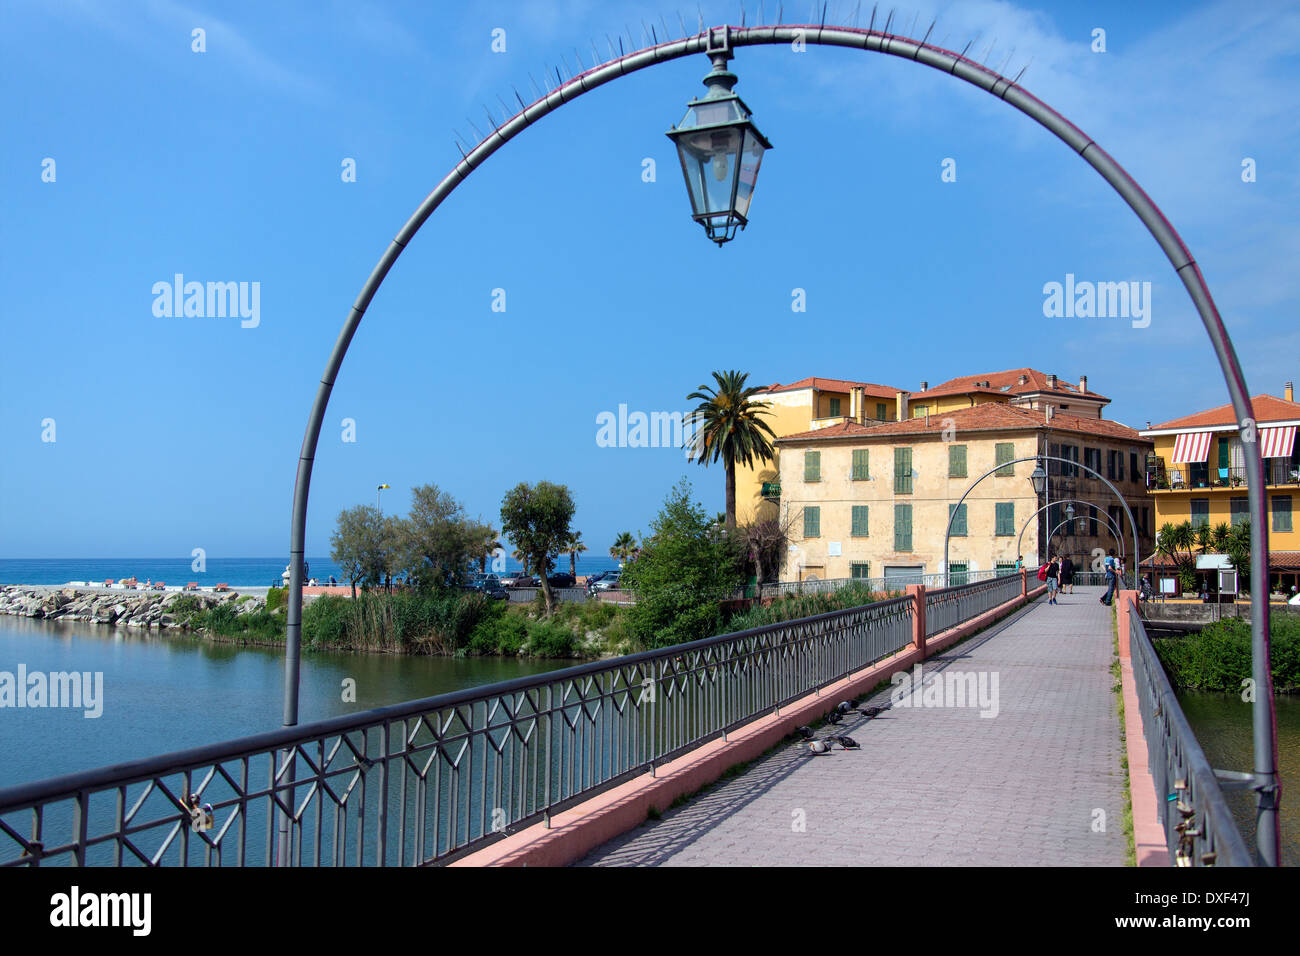 The town of Ventimigla in the province of Imperia on the northwest coast of Italy Stock Photo